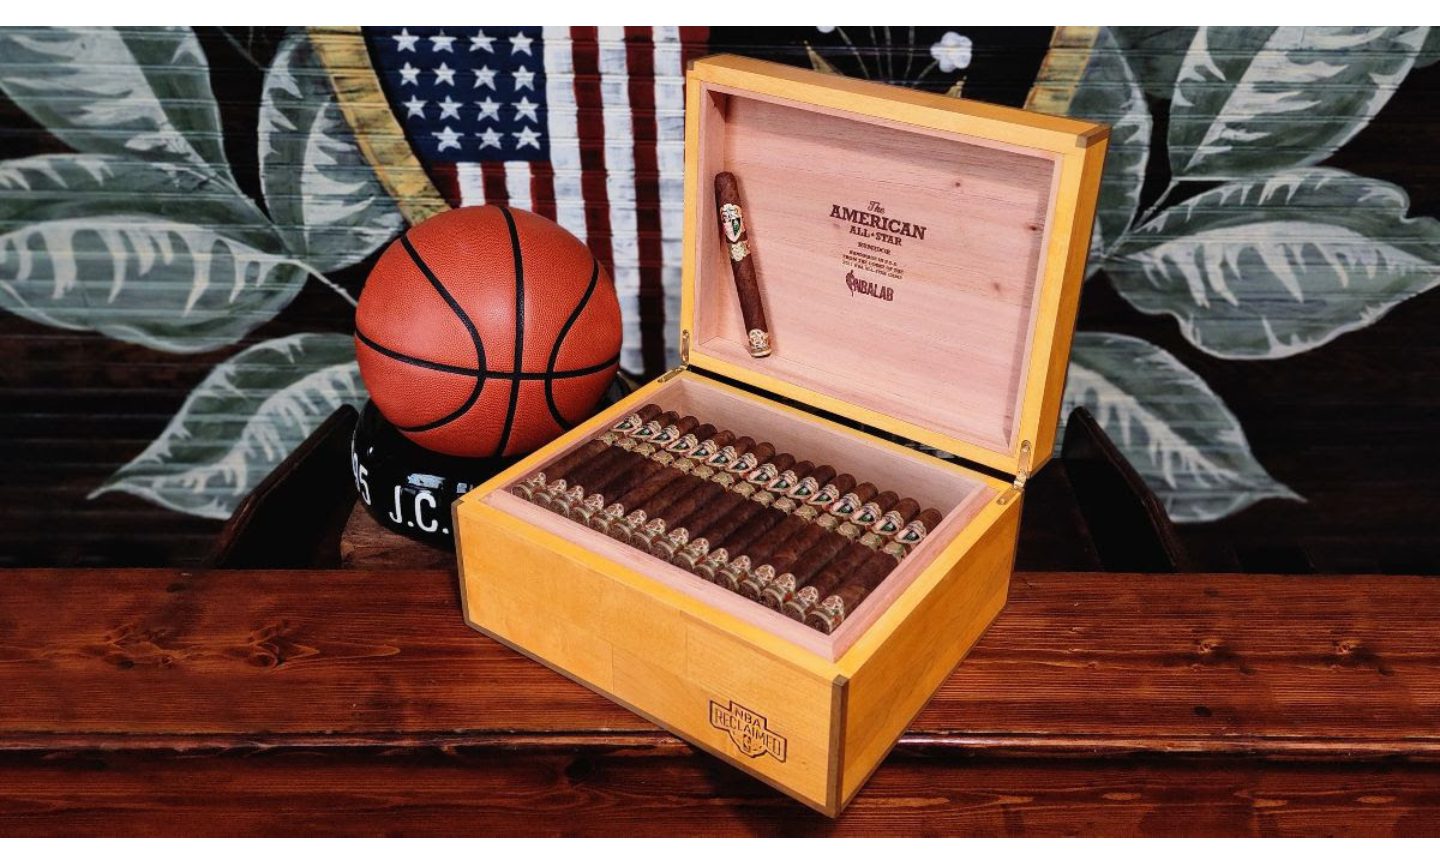 jc.-newman-ships-the-american-all-star-humidor